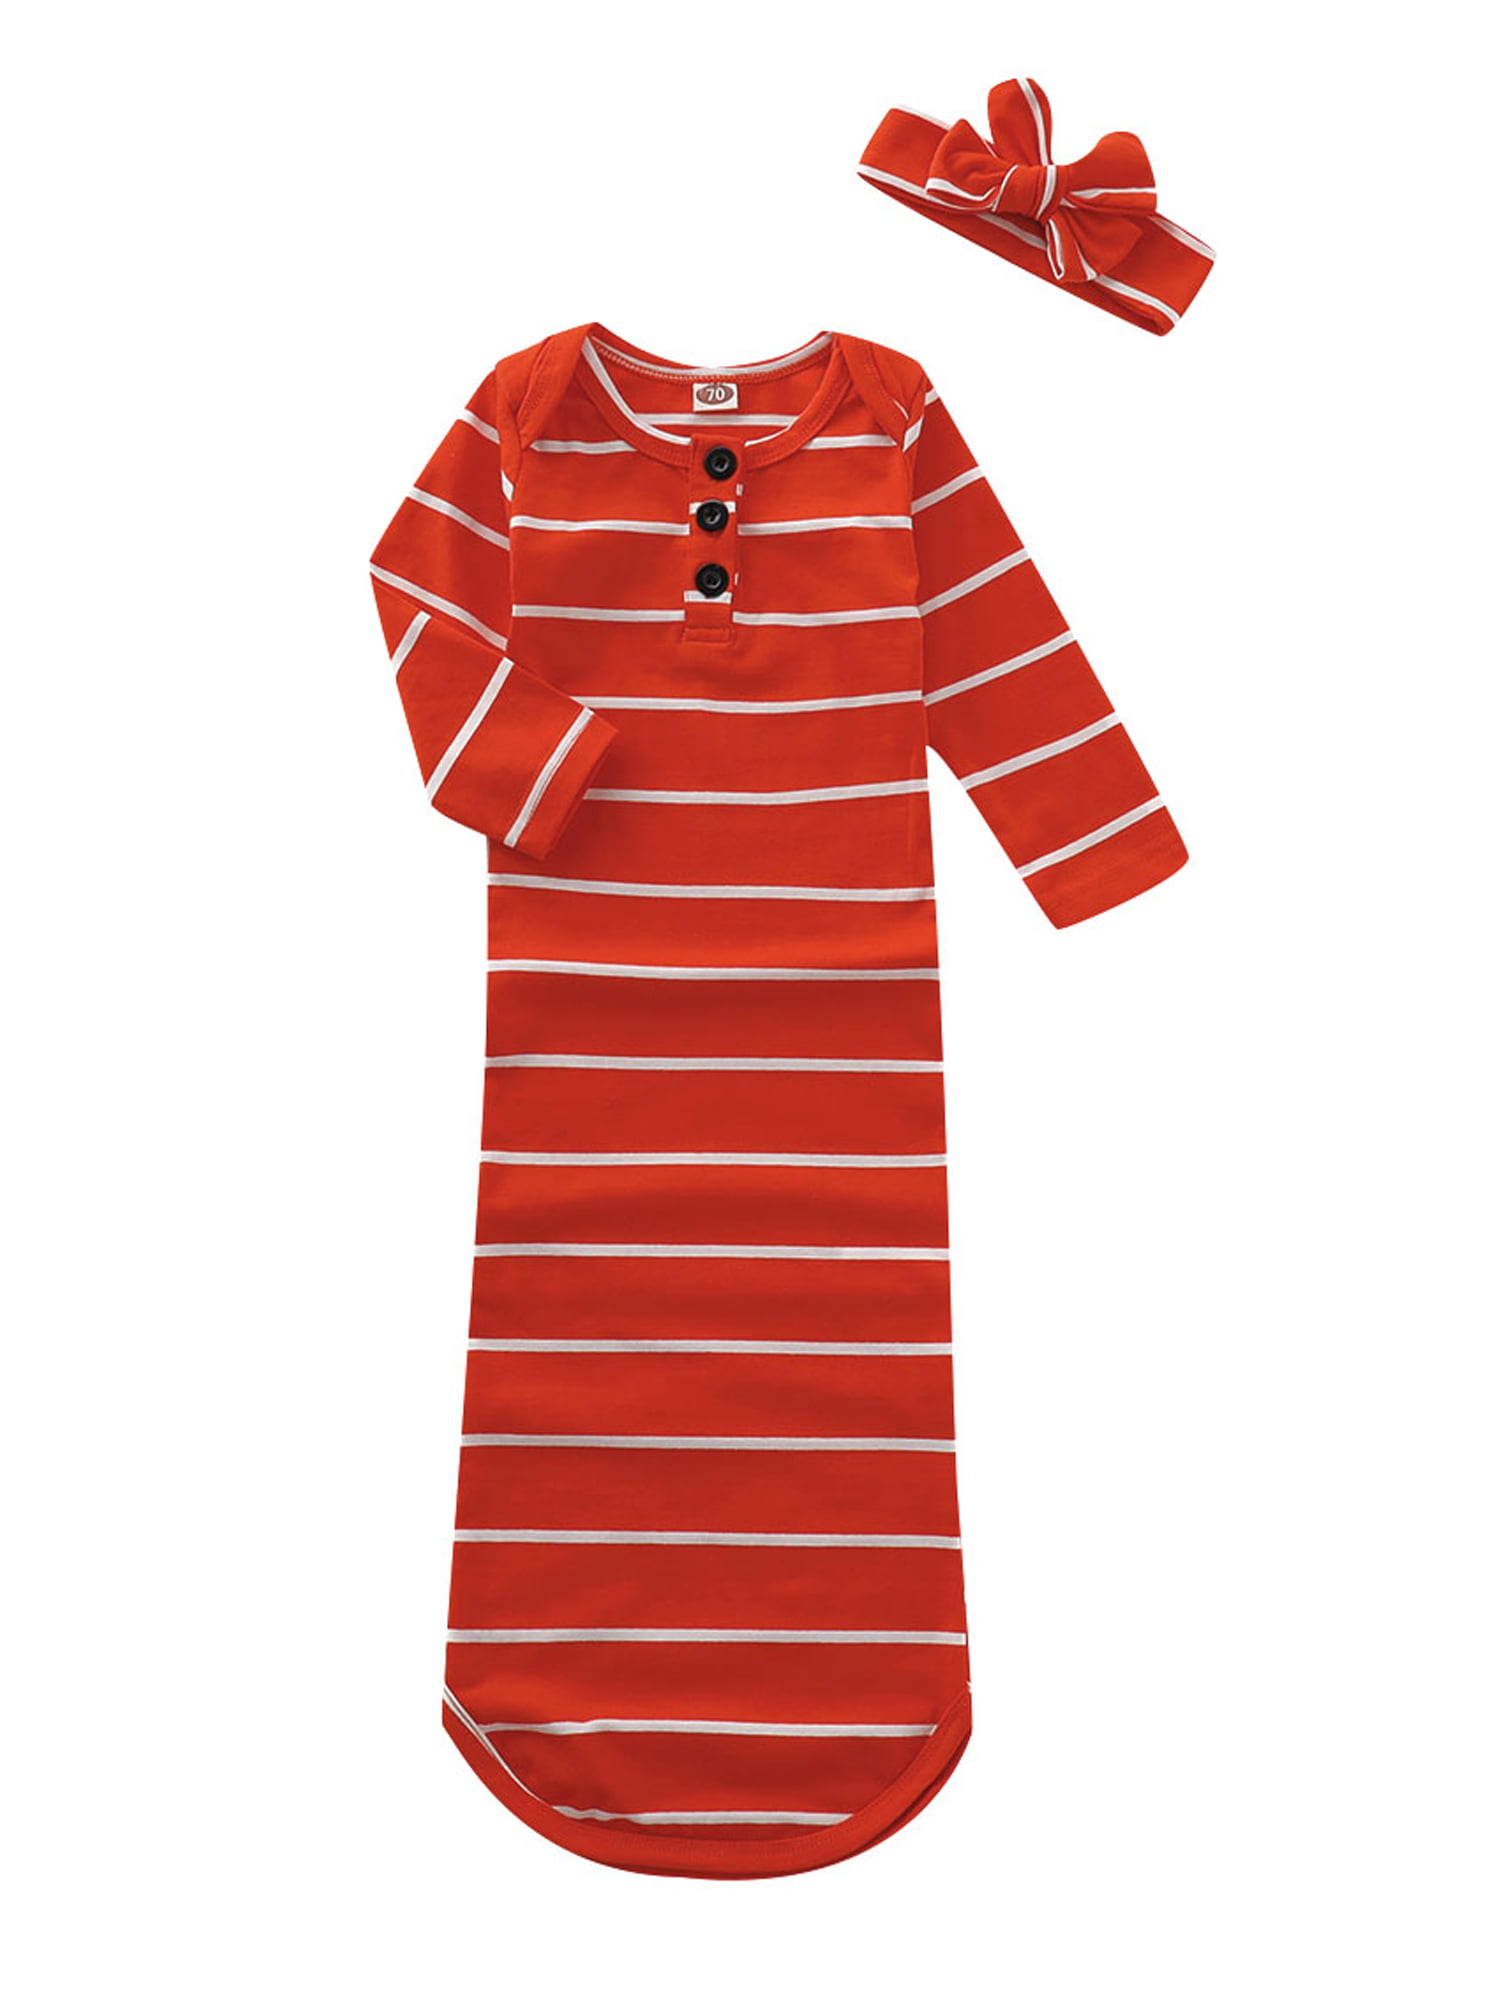 Unisex Baby Striped Cotton Sleeper Gowns with Cap Long Knotted Sleeping Bag